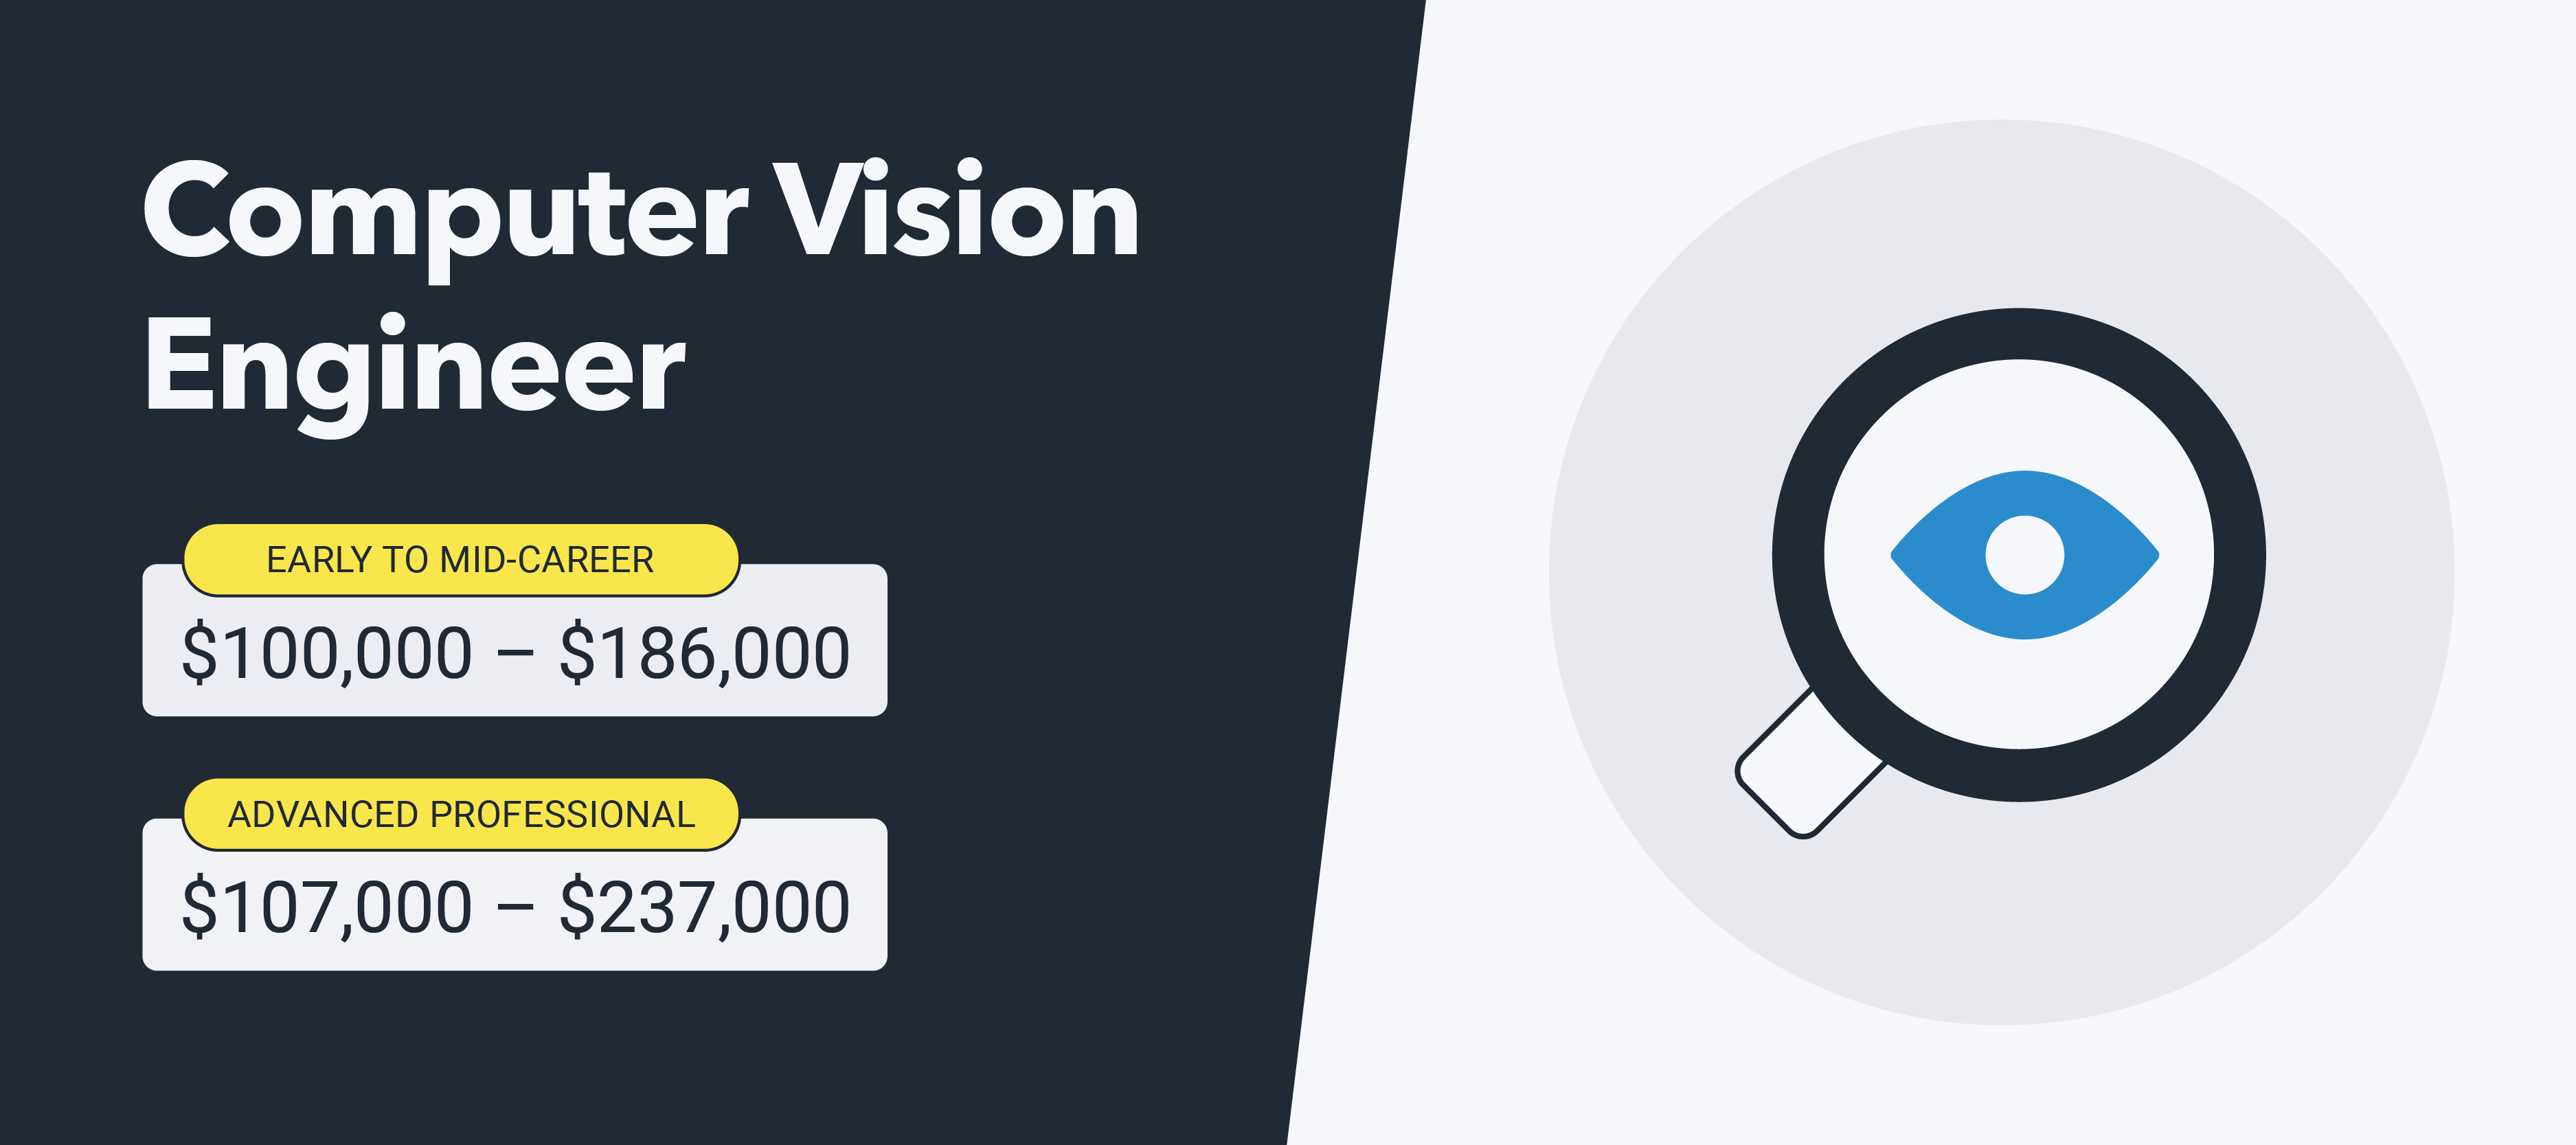 Computer Vision Engineer infographic.